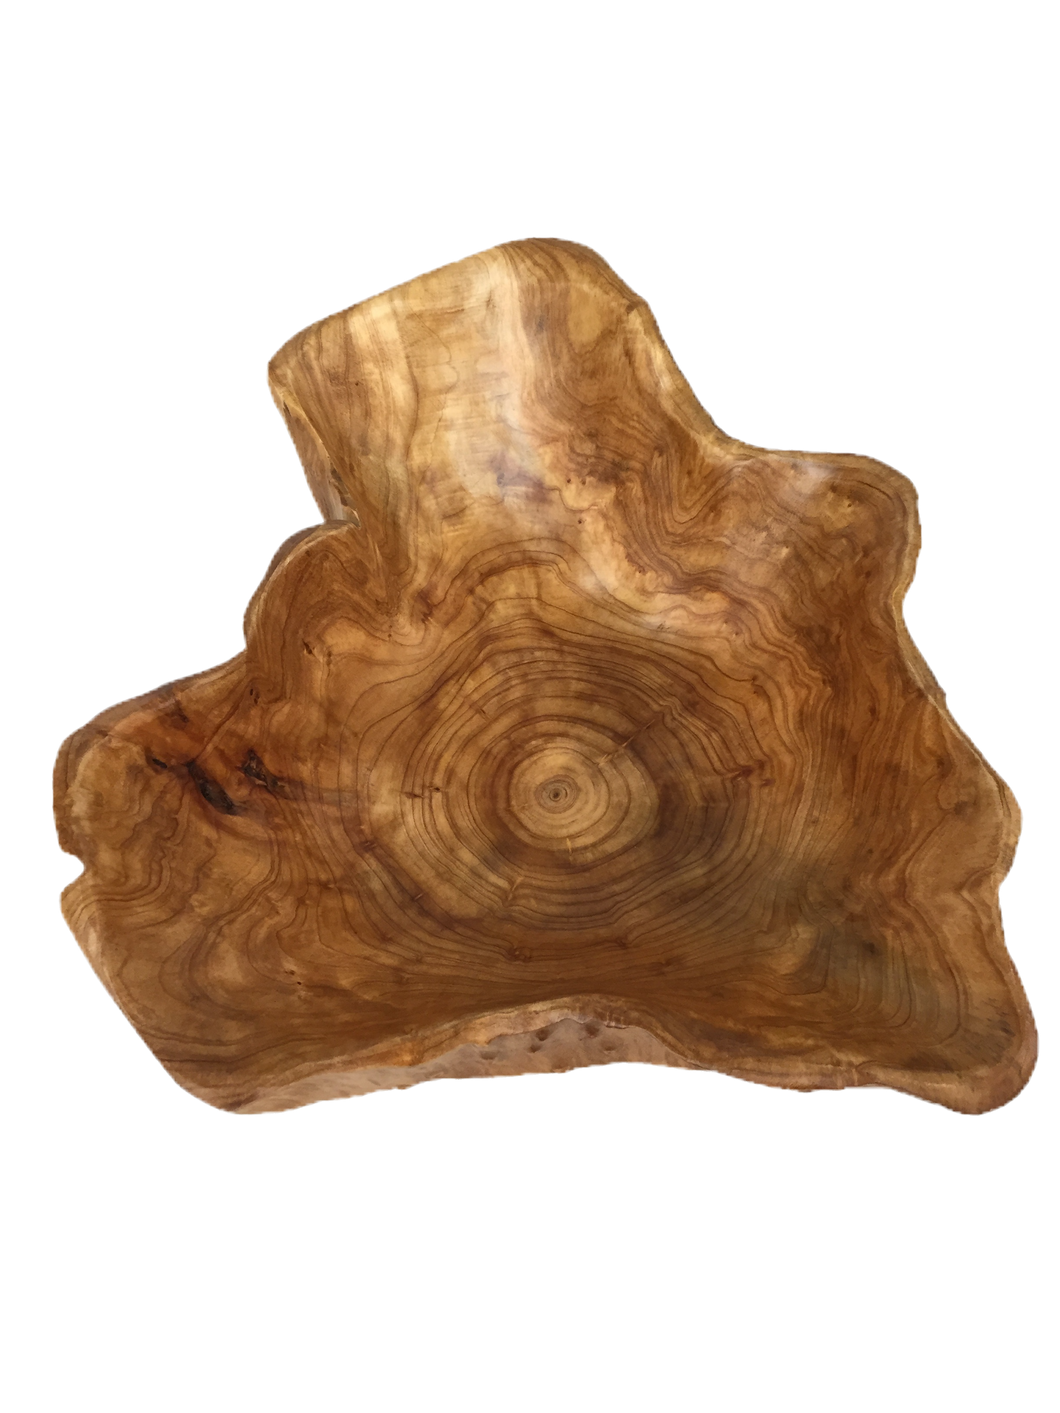 Hand-Crafted Root Wood Live Edge Bowl - Extra Large (20-21